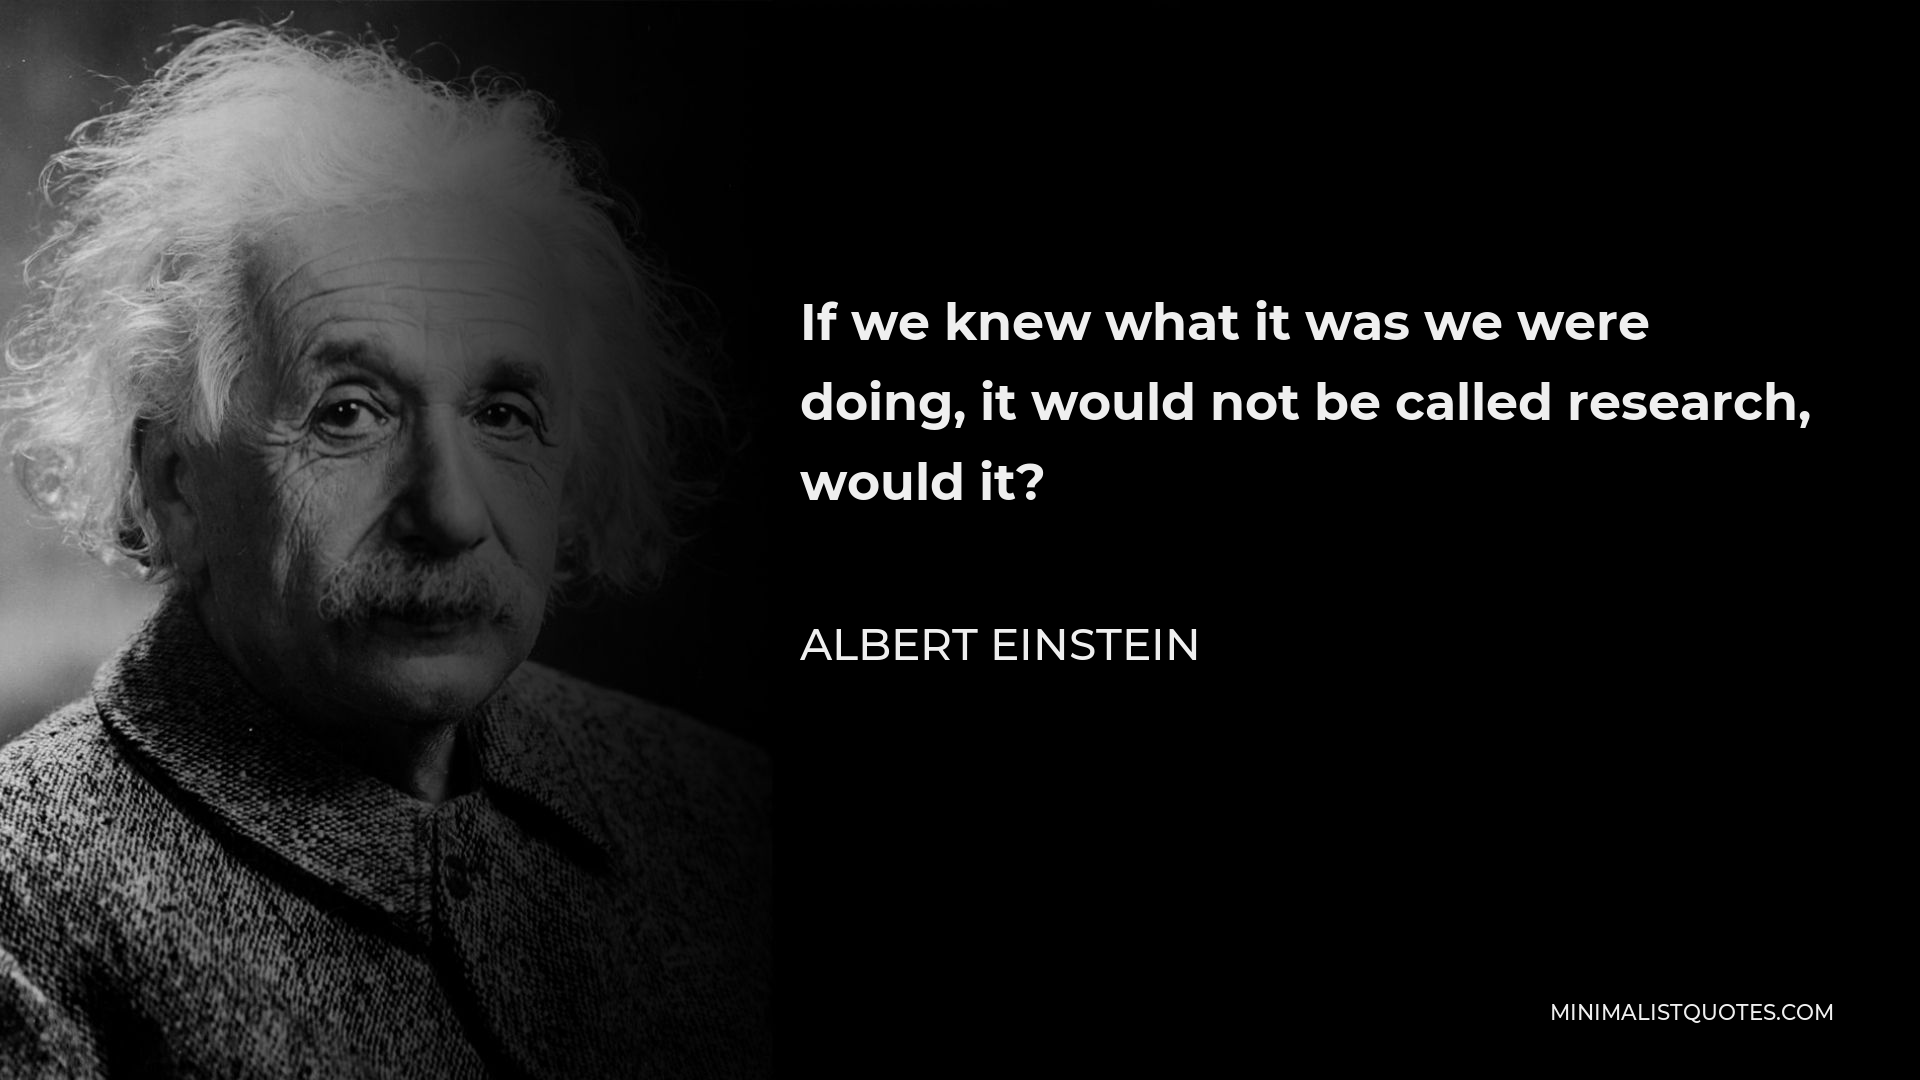 Albert Einstein Quote - If we knew what it was we were doing, it would not be called research, would it?